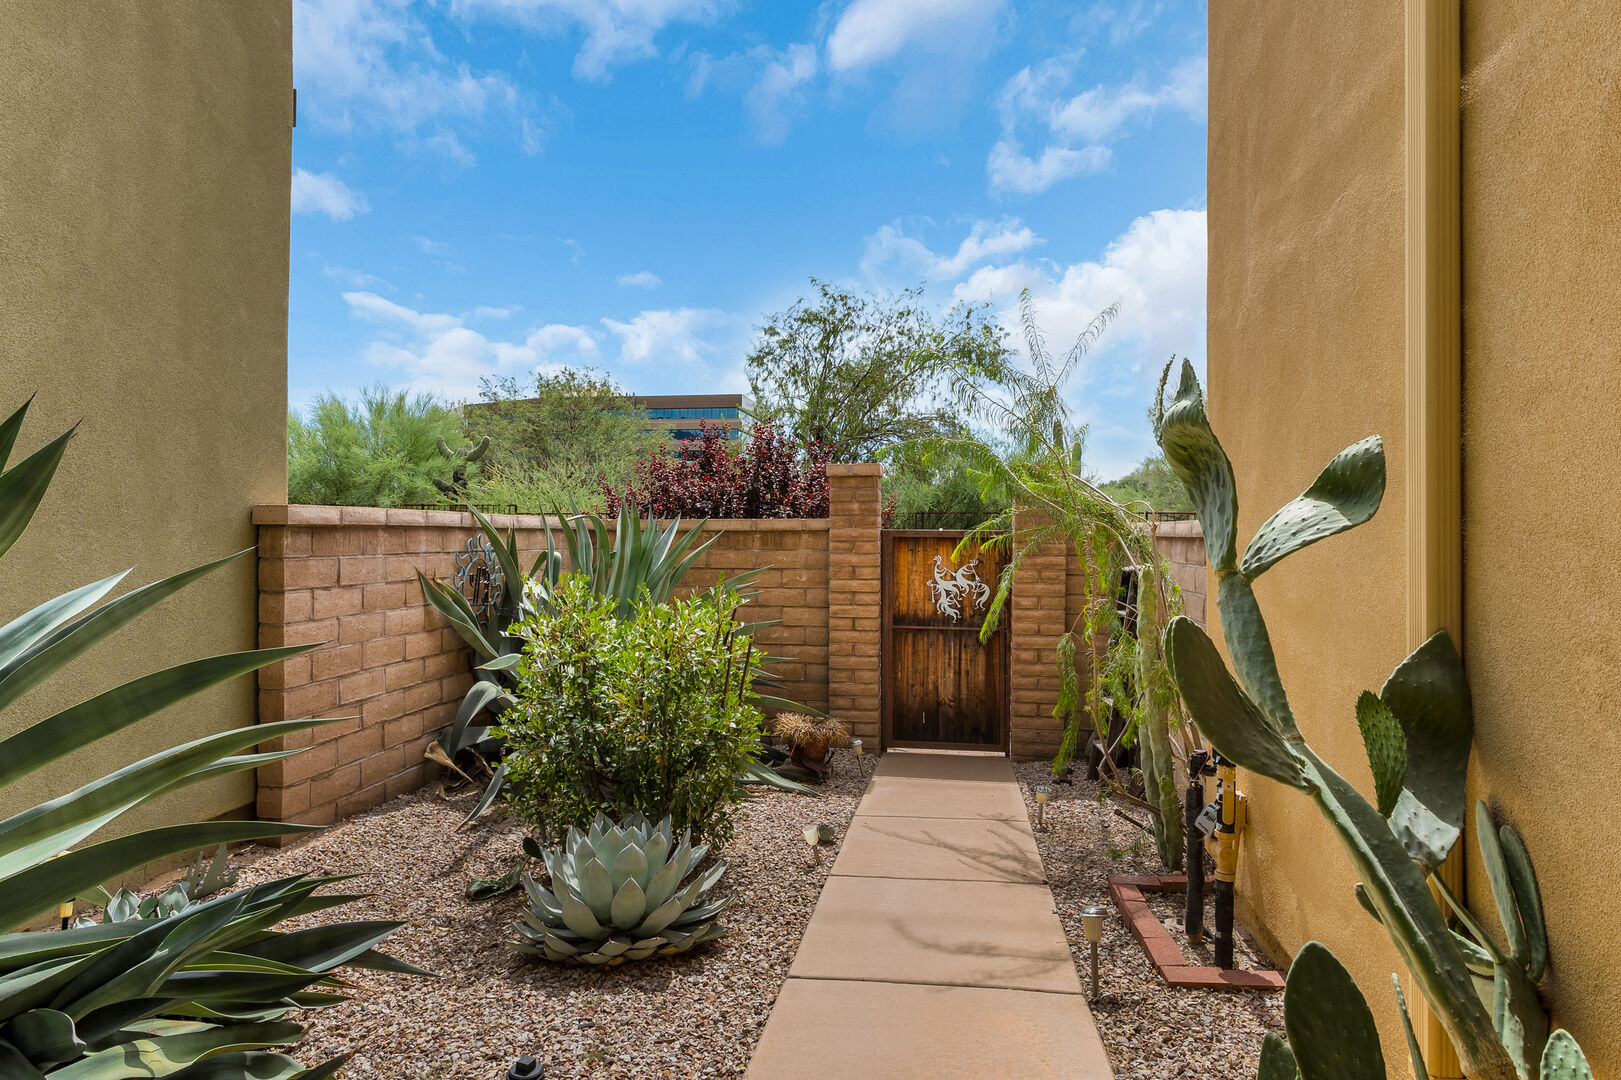 Gated front area with cute desert plant life!